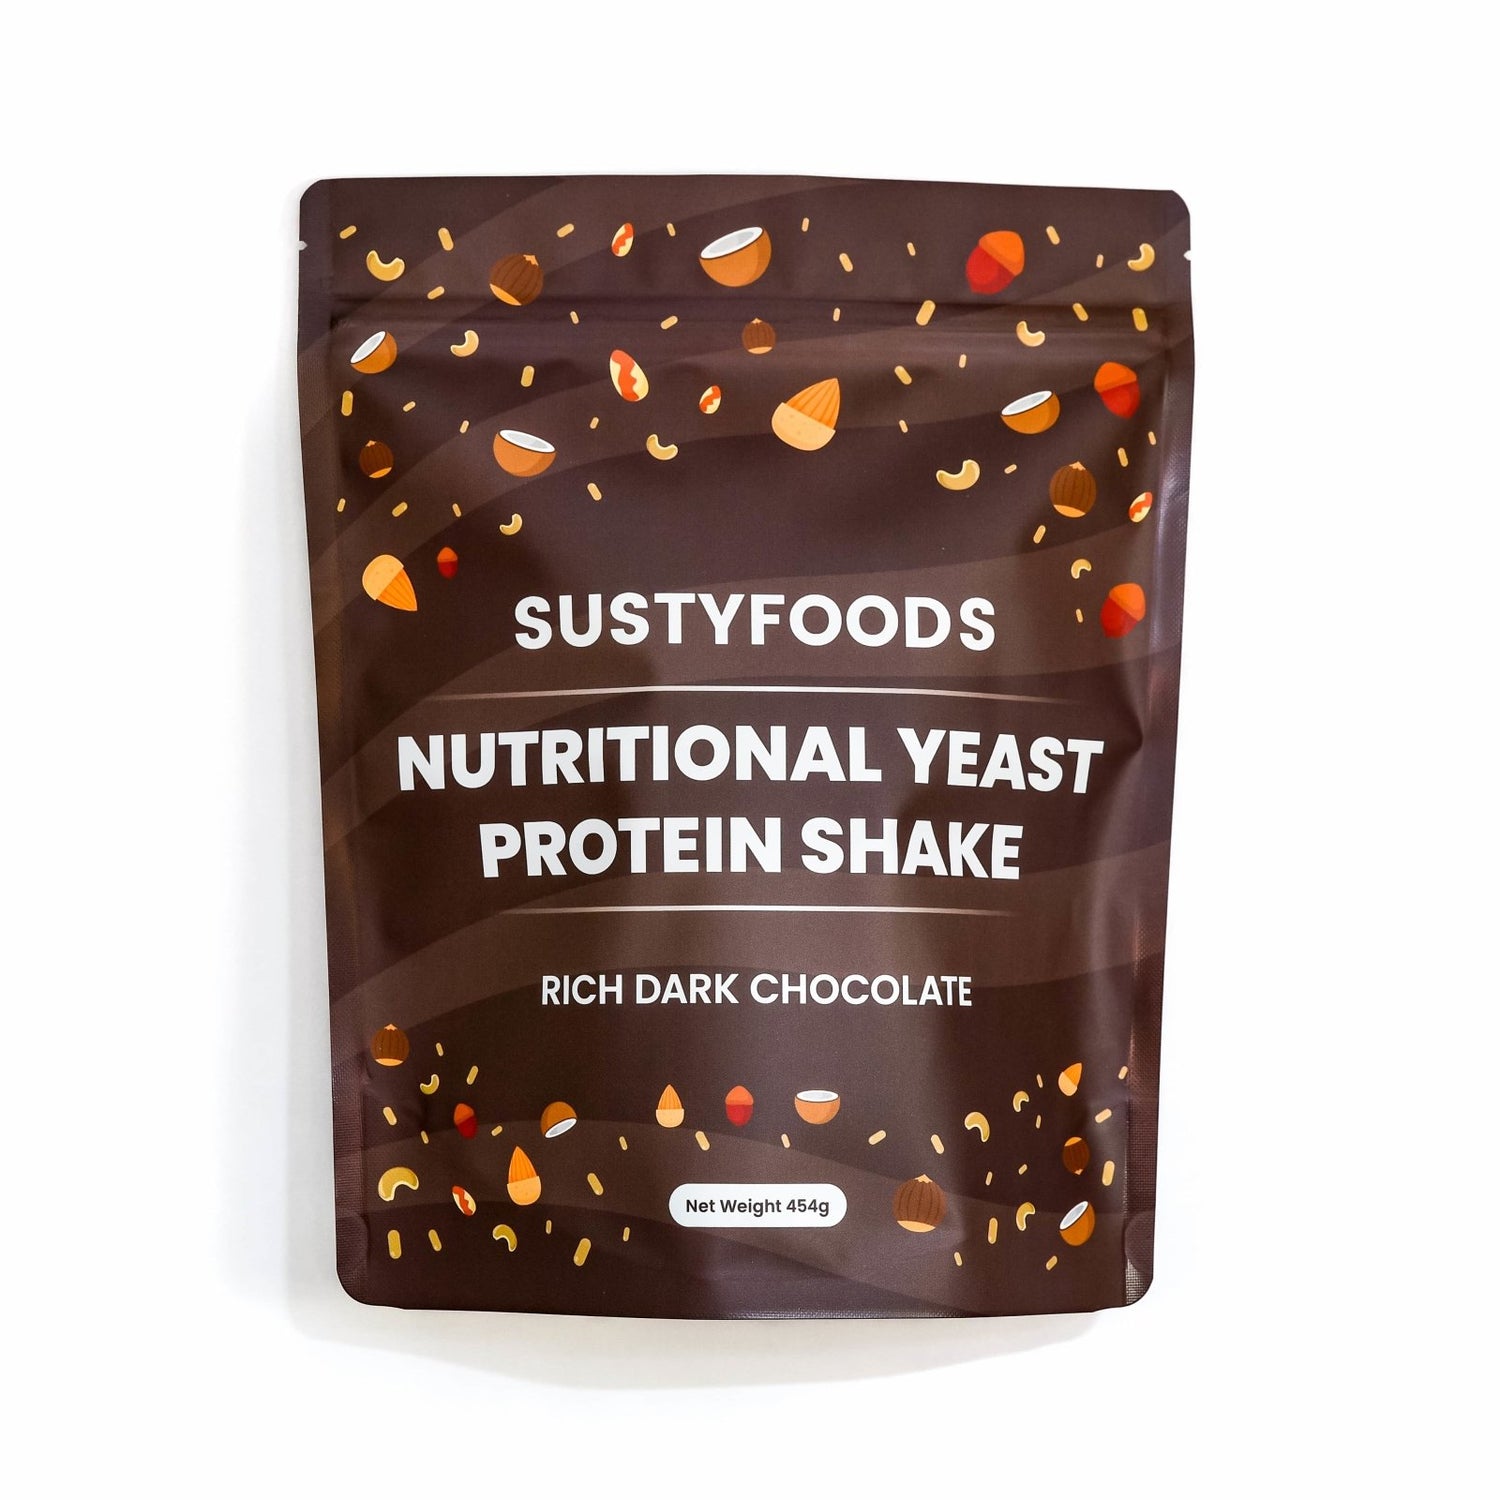 Nutritional Yeast Protein Shake | 454g (1 lb) - Sustyfoods Singapore meal replacements